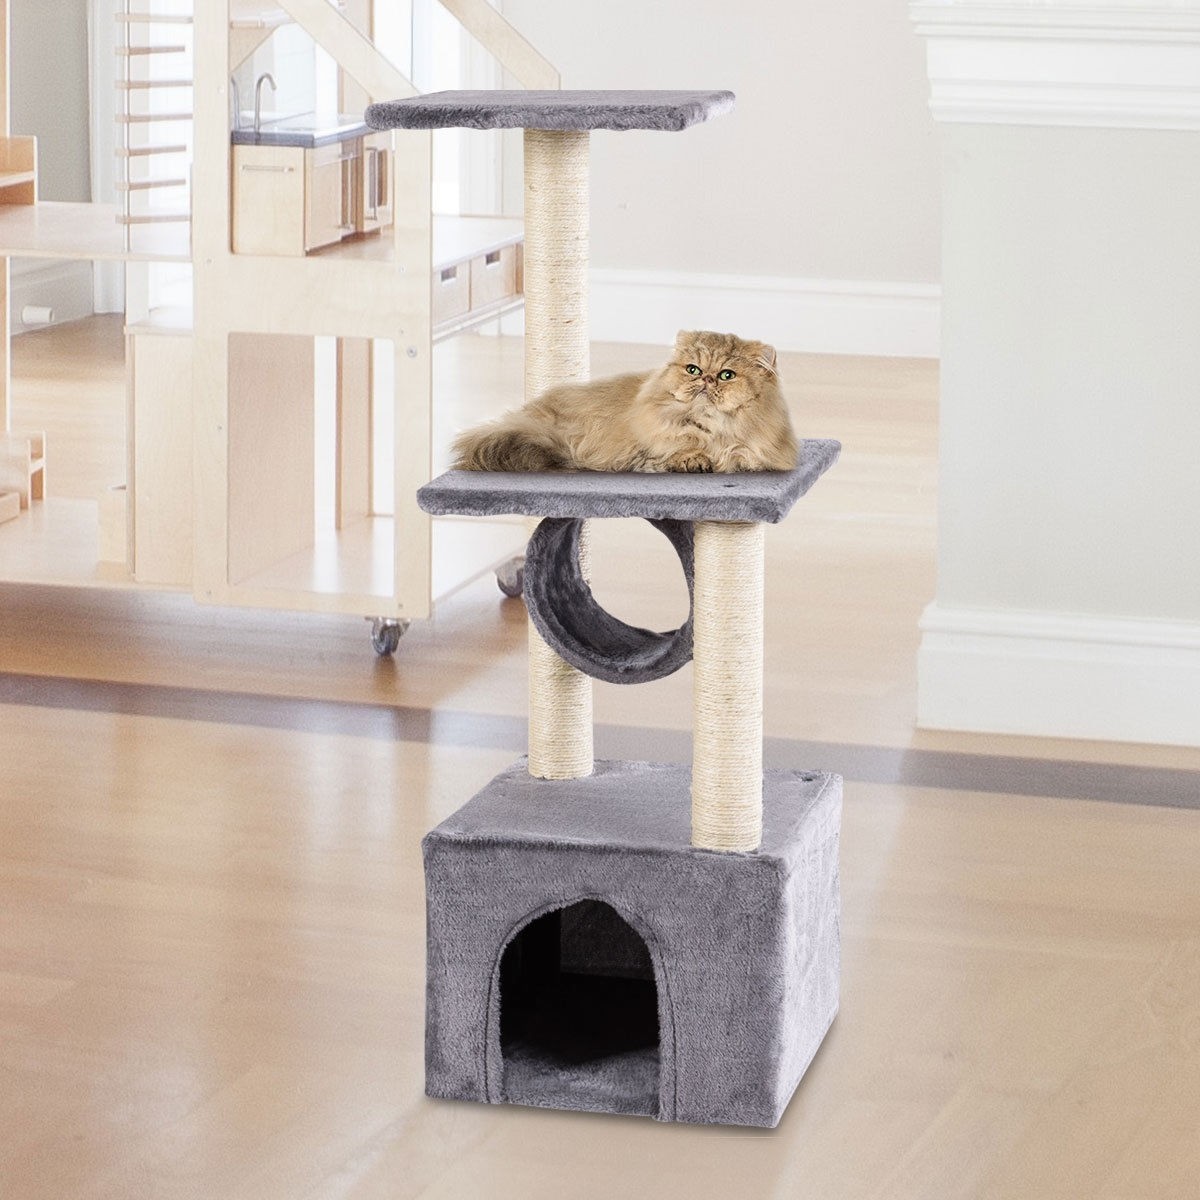 37 In. Cat Tree Condo Kitten Pet House with Scratch Post